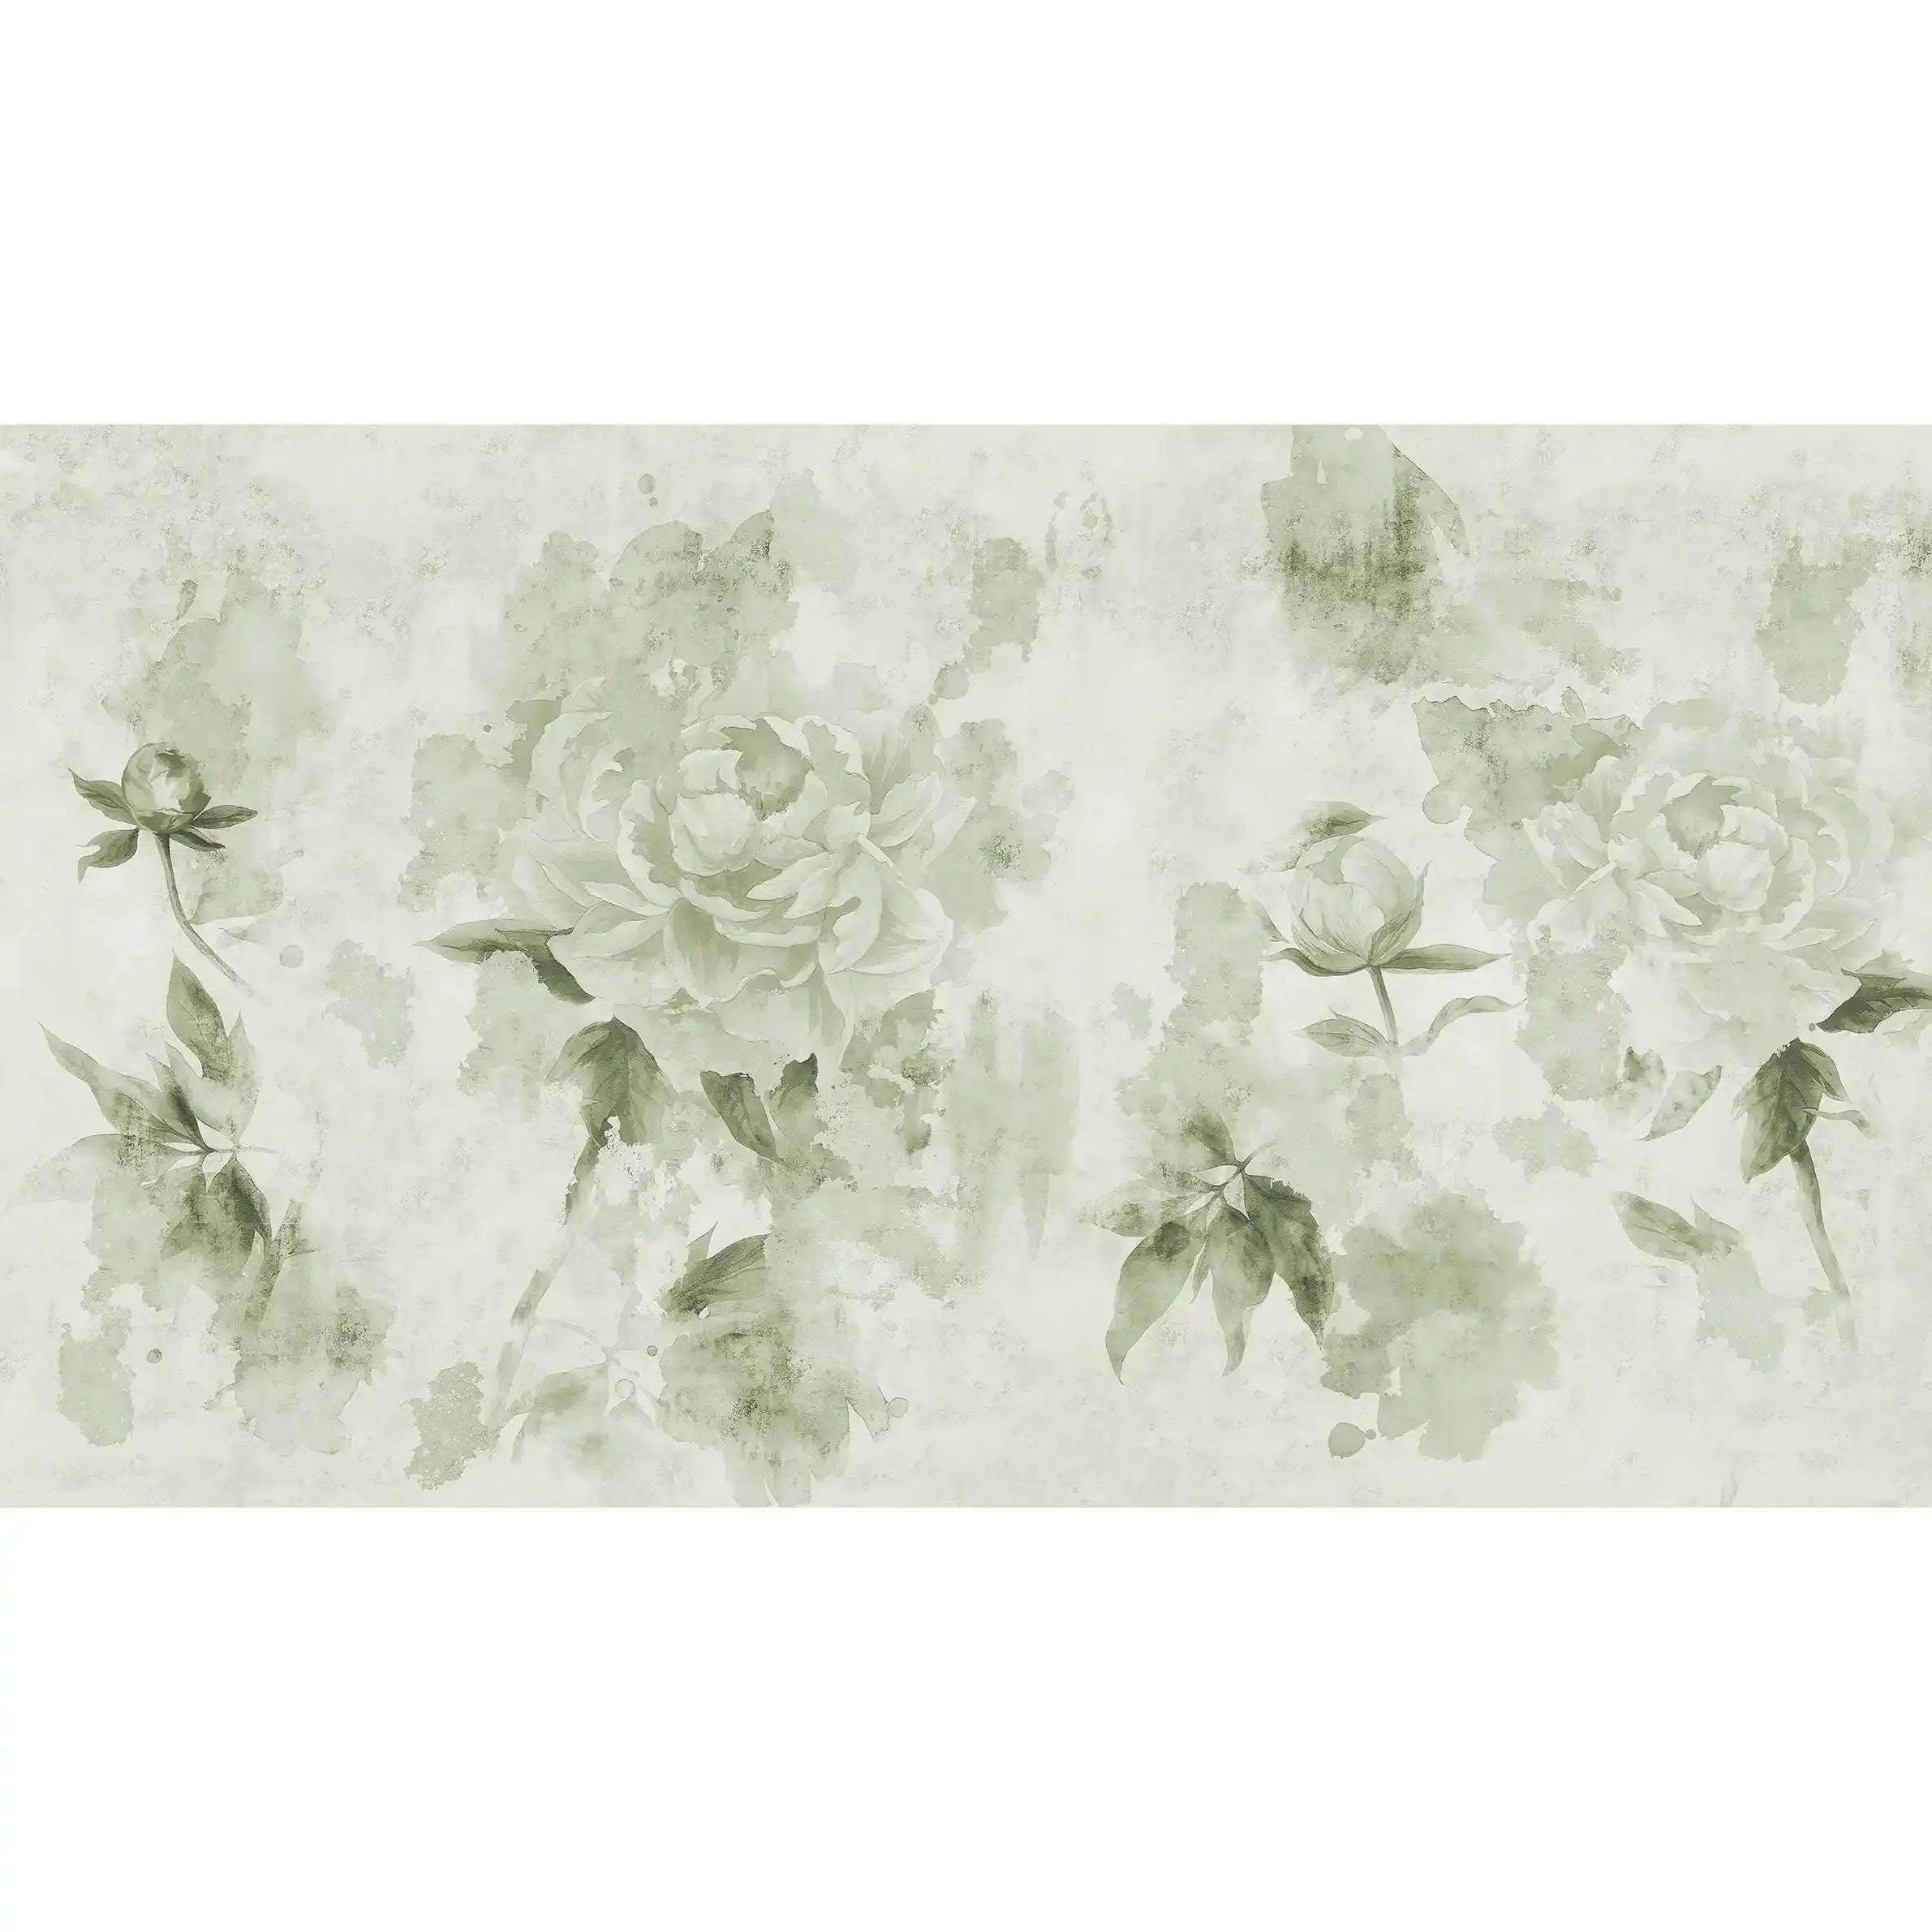 3004-B / Watercolor Floral Peel and Stick Wallpaper - Peony Design for Modern Room Decor, Perfect for Bedroom and Bathroom - Artevella